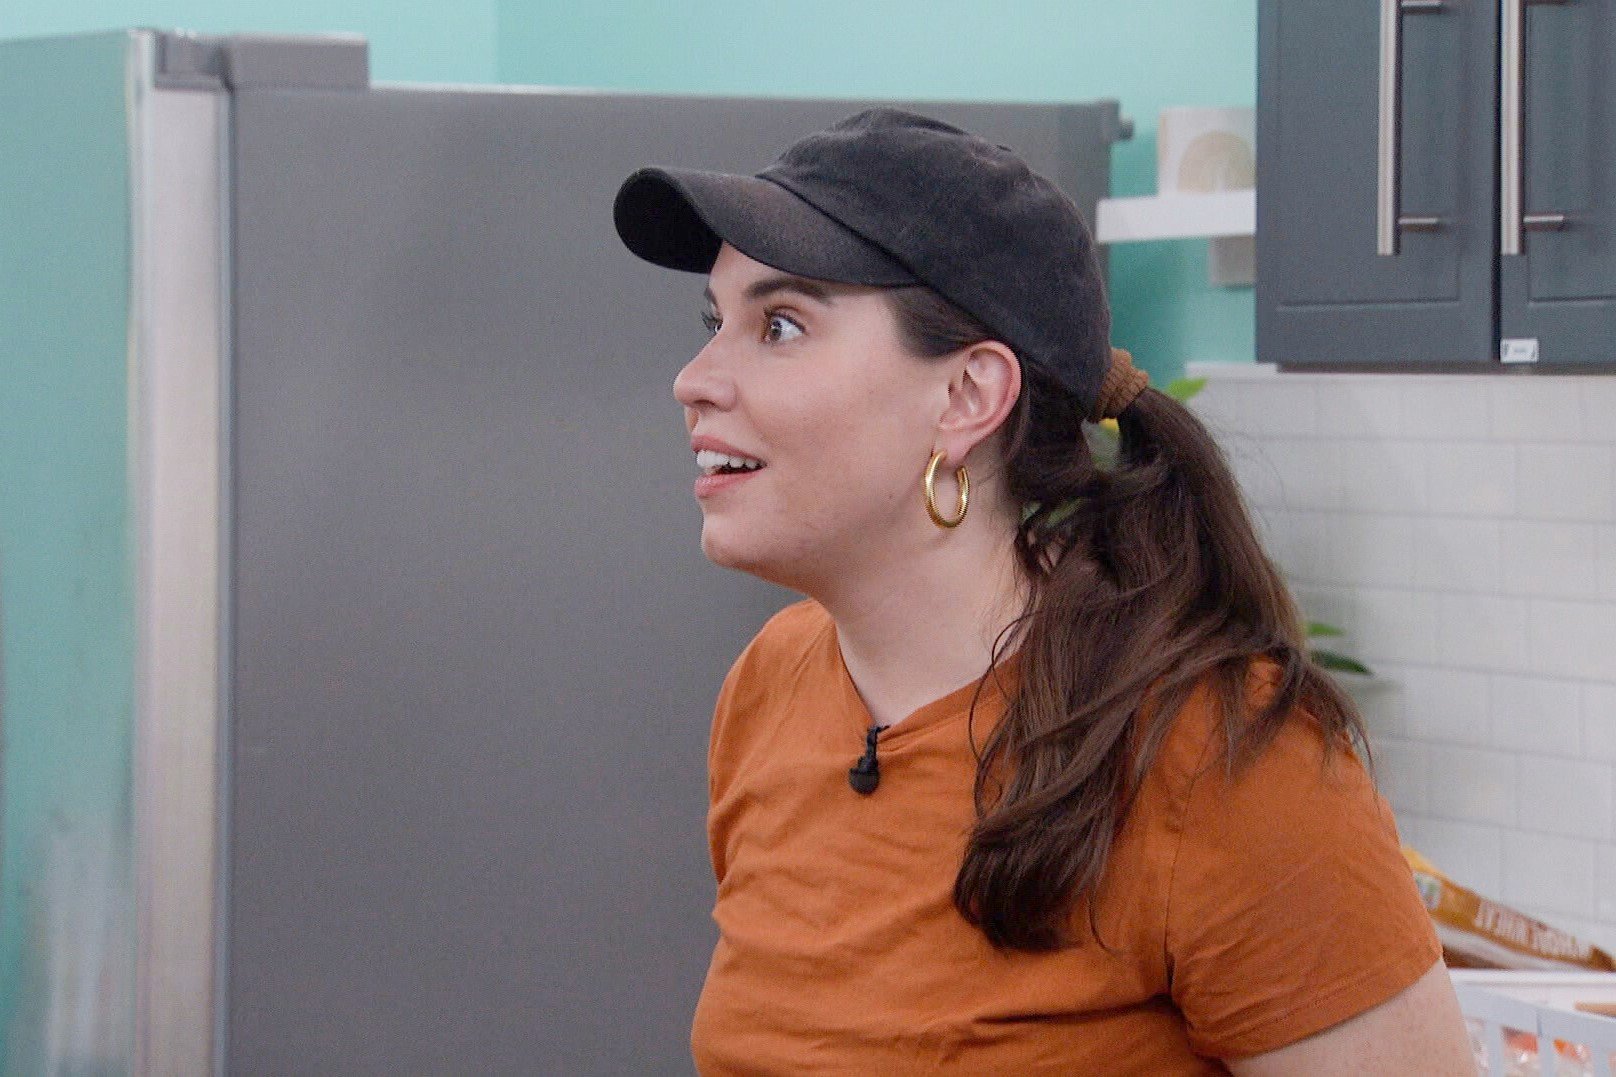 Brittany Hoopes, who stars in 'Big Brother 24' on CBS, wears an orange shirt and black baseball cap